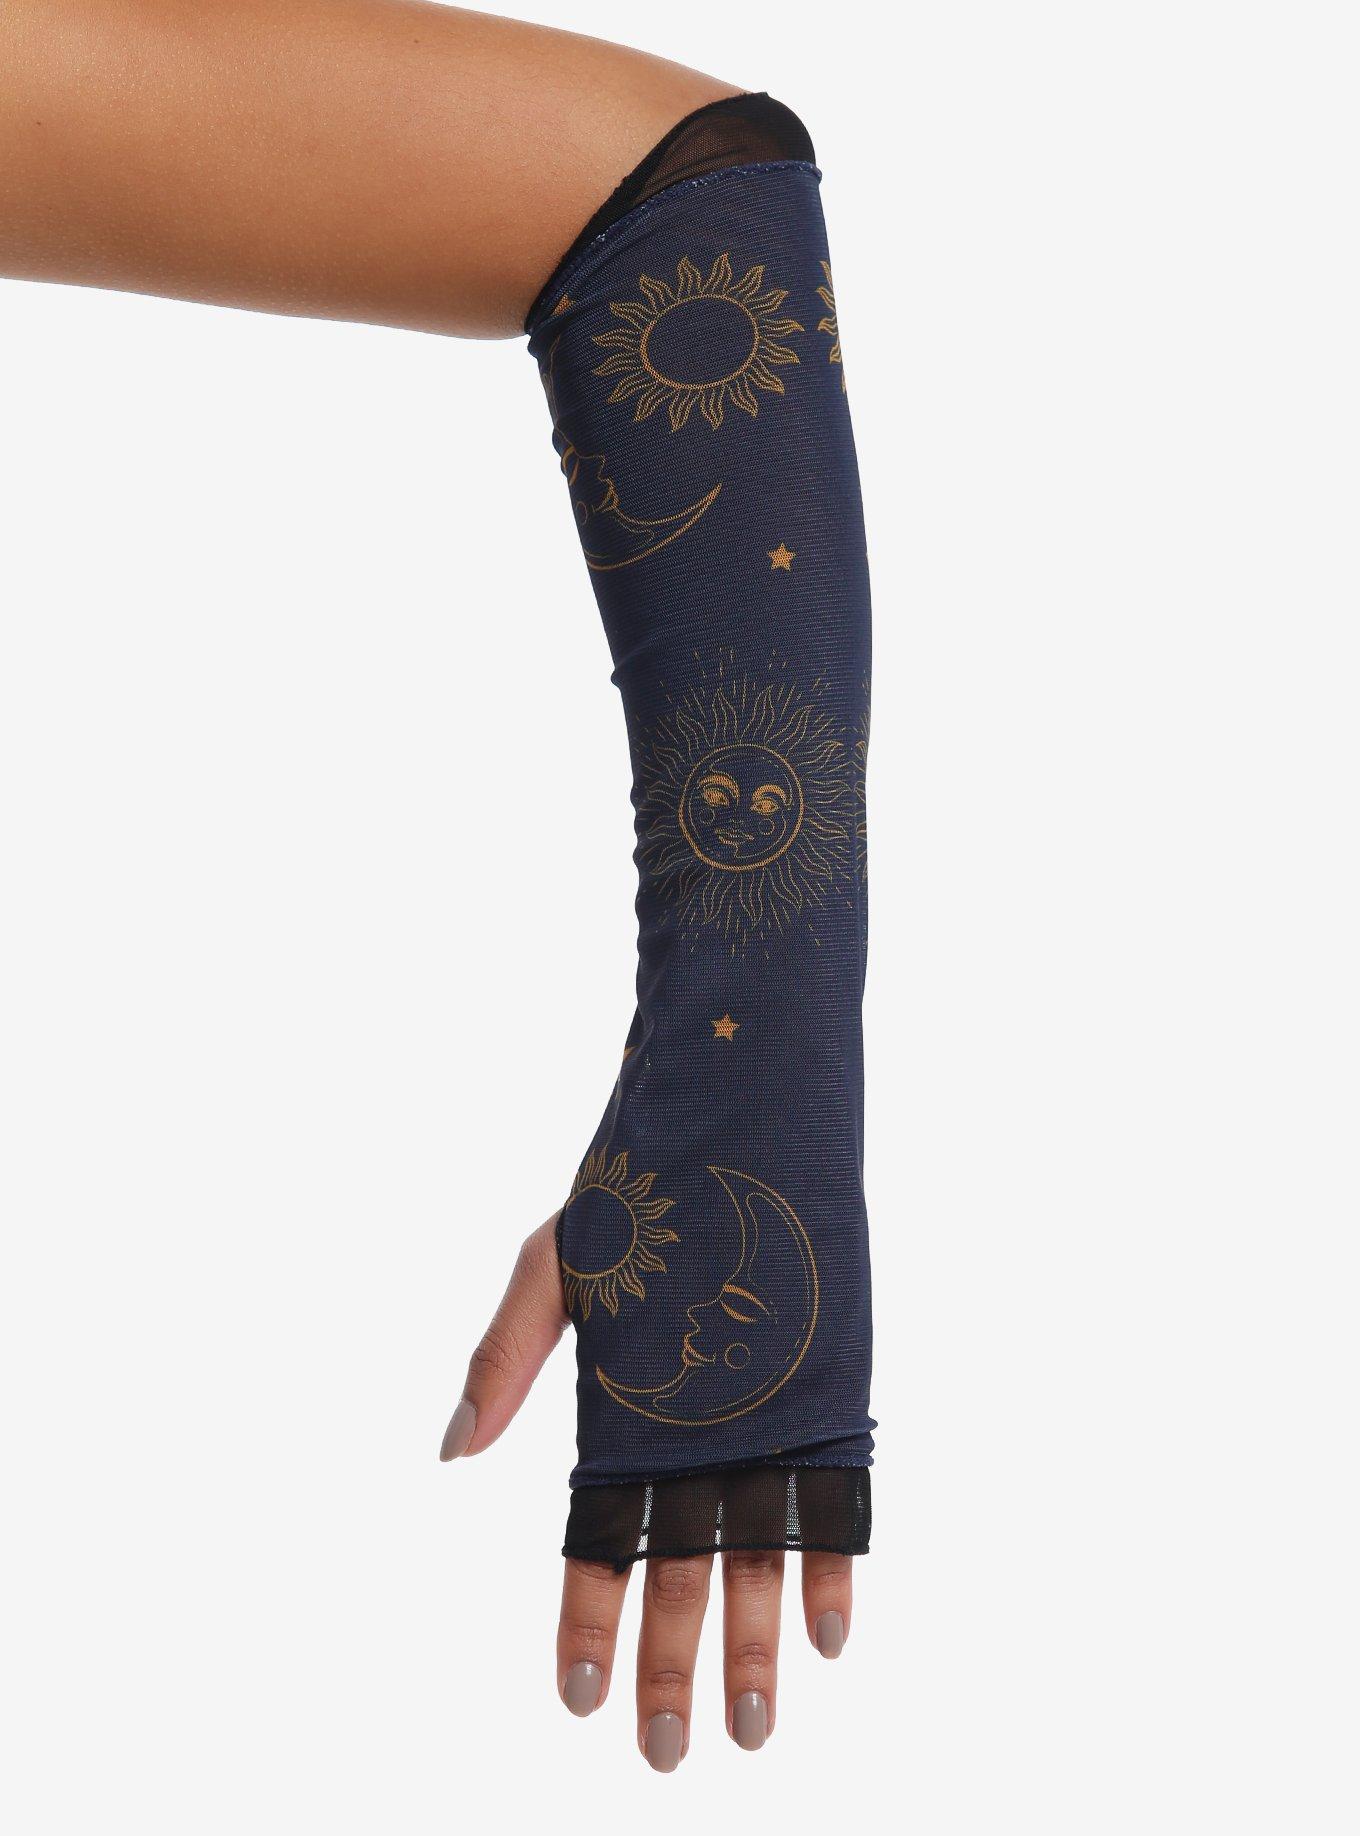 Celestial Mesh Layered Arm Warmers